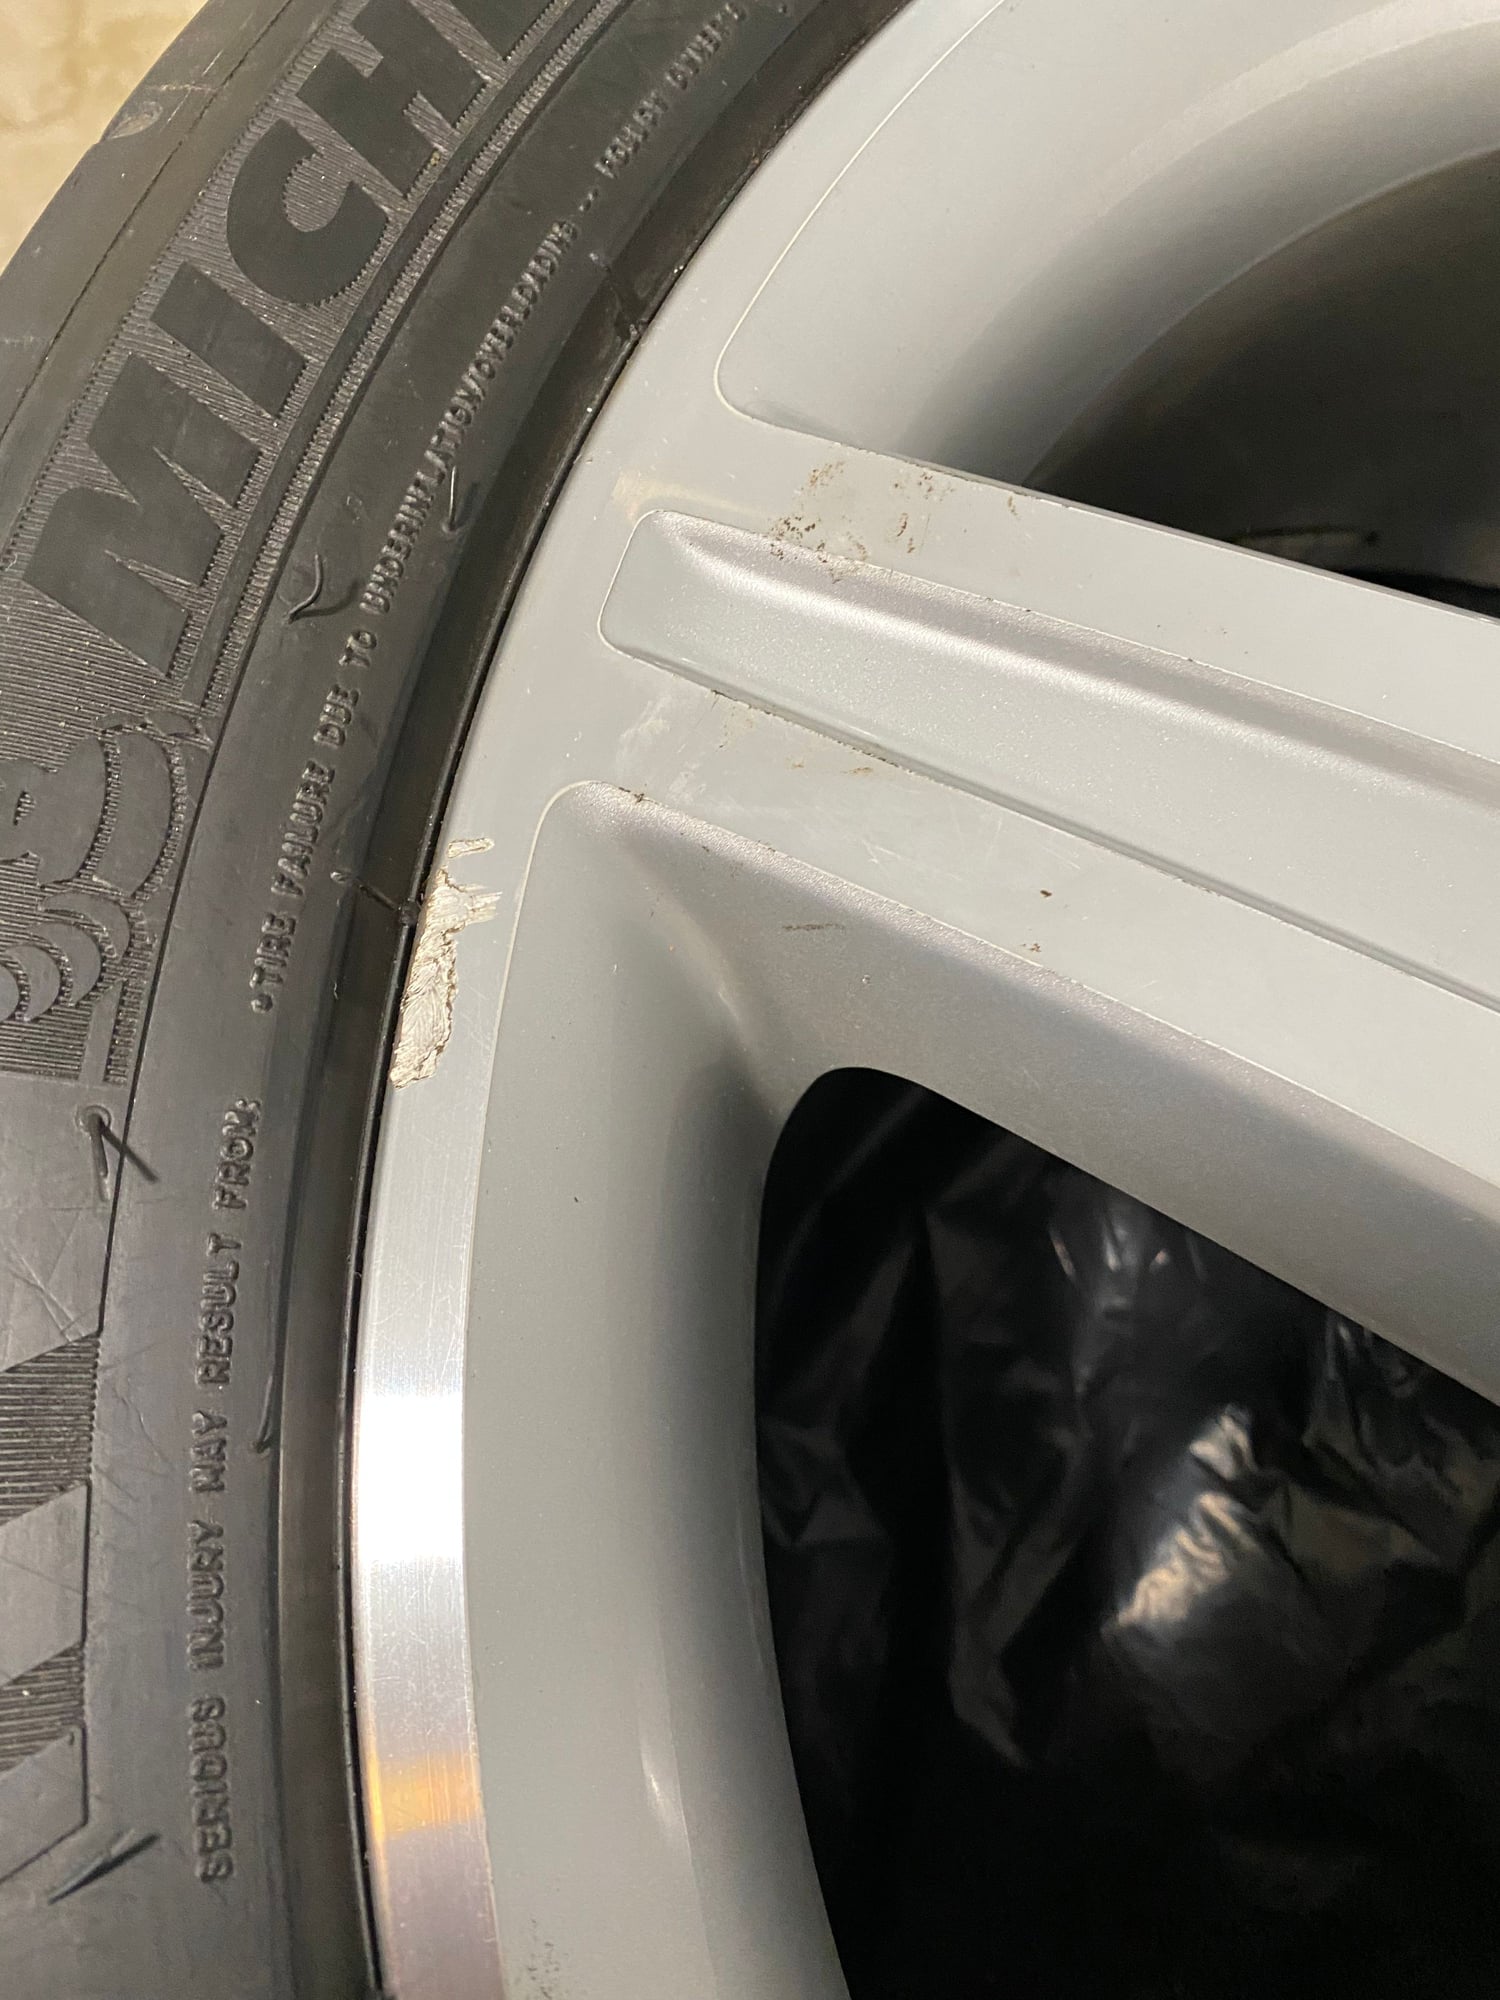 Wheels and Tires/Axles - AMG wheels off a CL550 - Used - 2007 to 2014 Mercedes-Benz CL550 - Wesley Chapel, FL 33543, United States